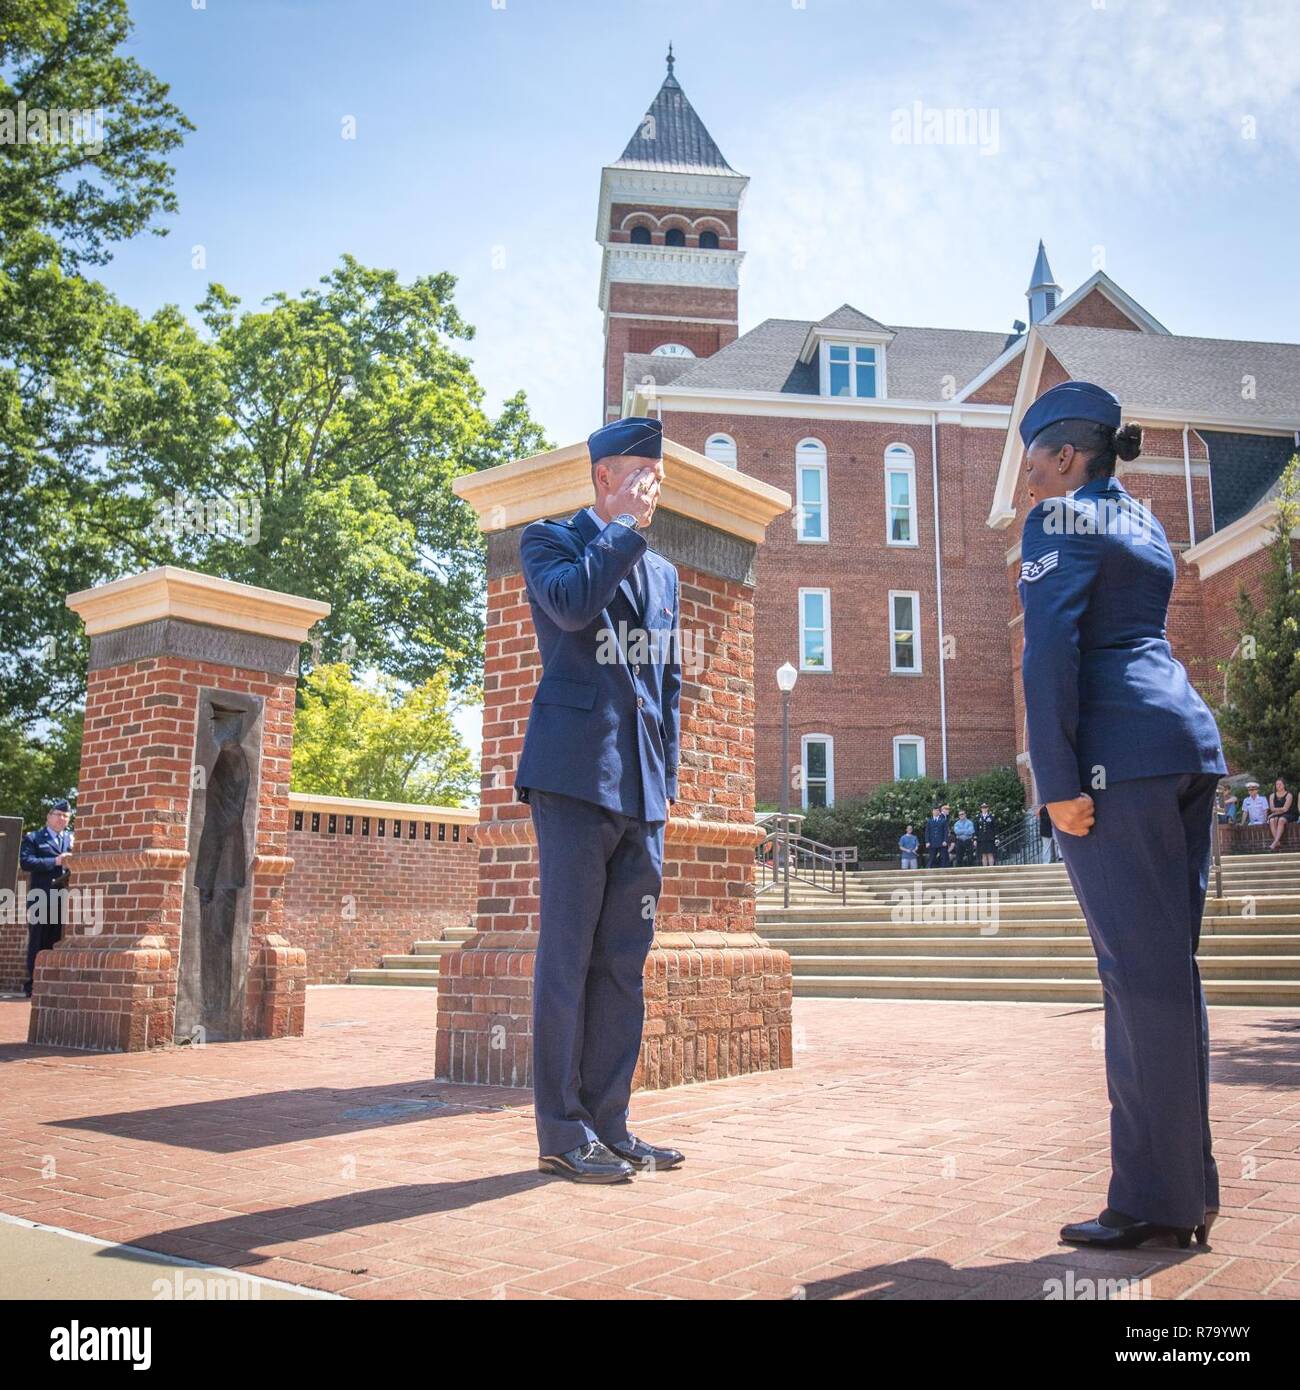 Newly-commissioned U.S. Air Force 2nd Lt. Sean Mac Lain (left) recieves his first salute during a Silver Dollar Ceremony after the Clemson University Reserve Officers’ Training Corps commissioning ceremony, May 10, 2017. Mac Lain was a member of both the 2016 Clemson football National Championship team and the Clemson Pershing Rifles 2016 National Champion drill and ceremony squad. Stock Photo